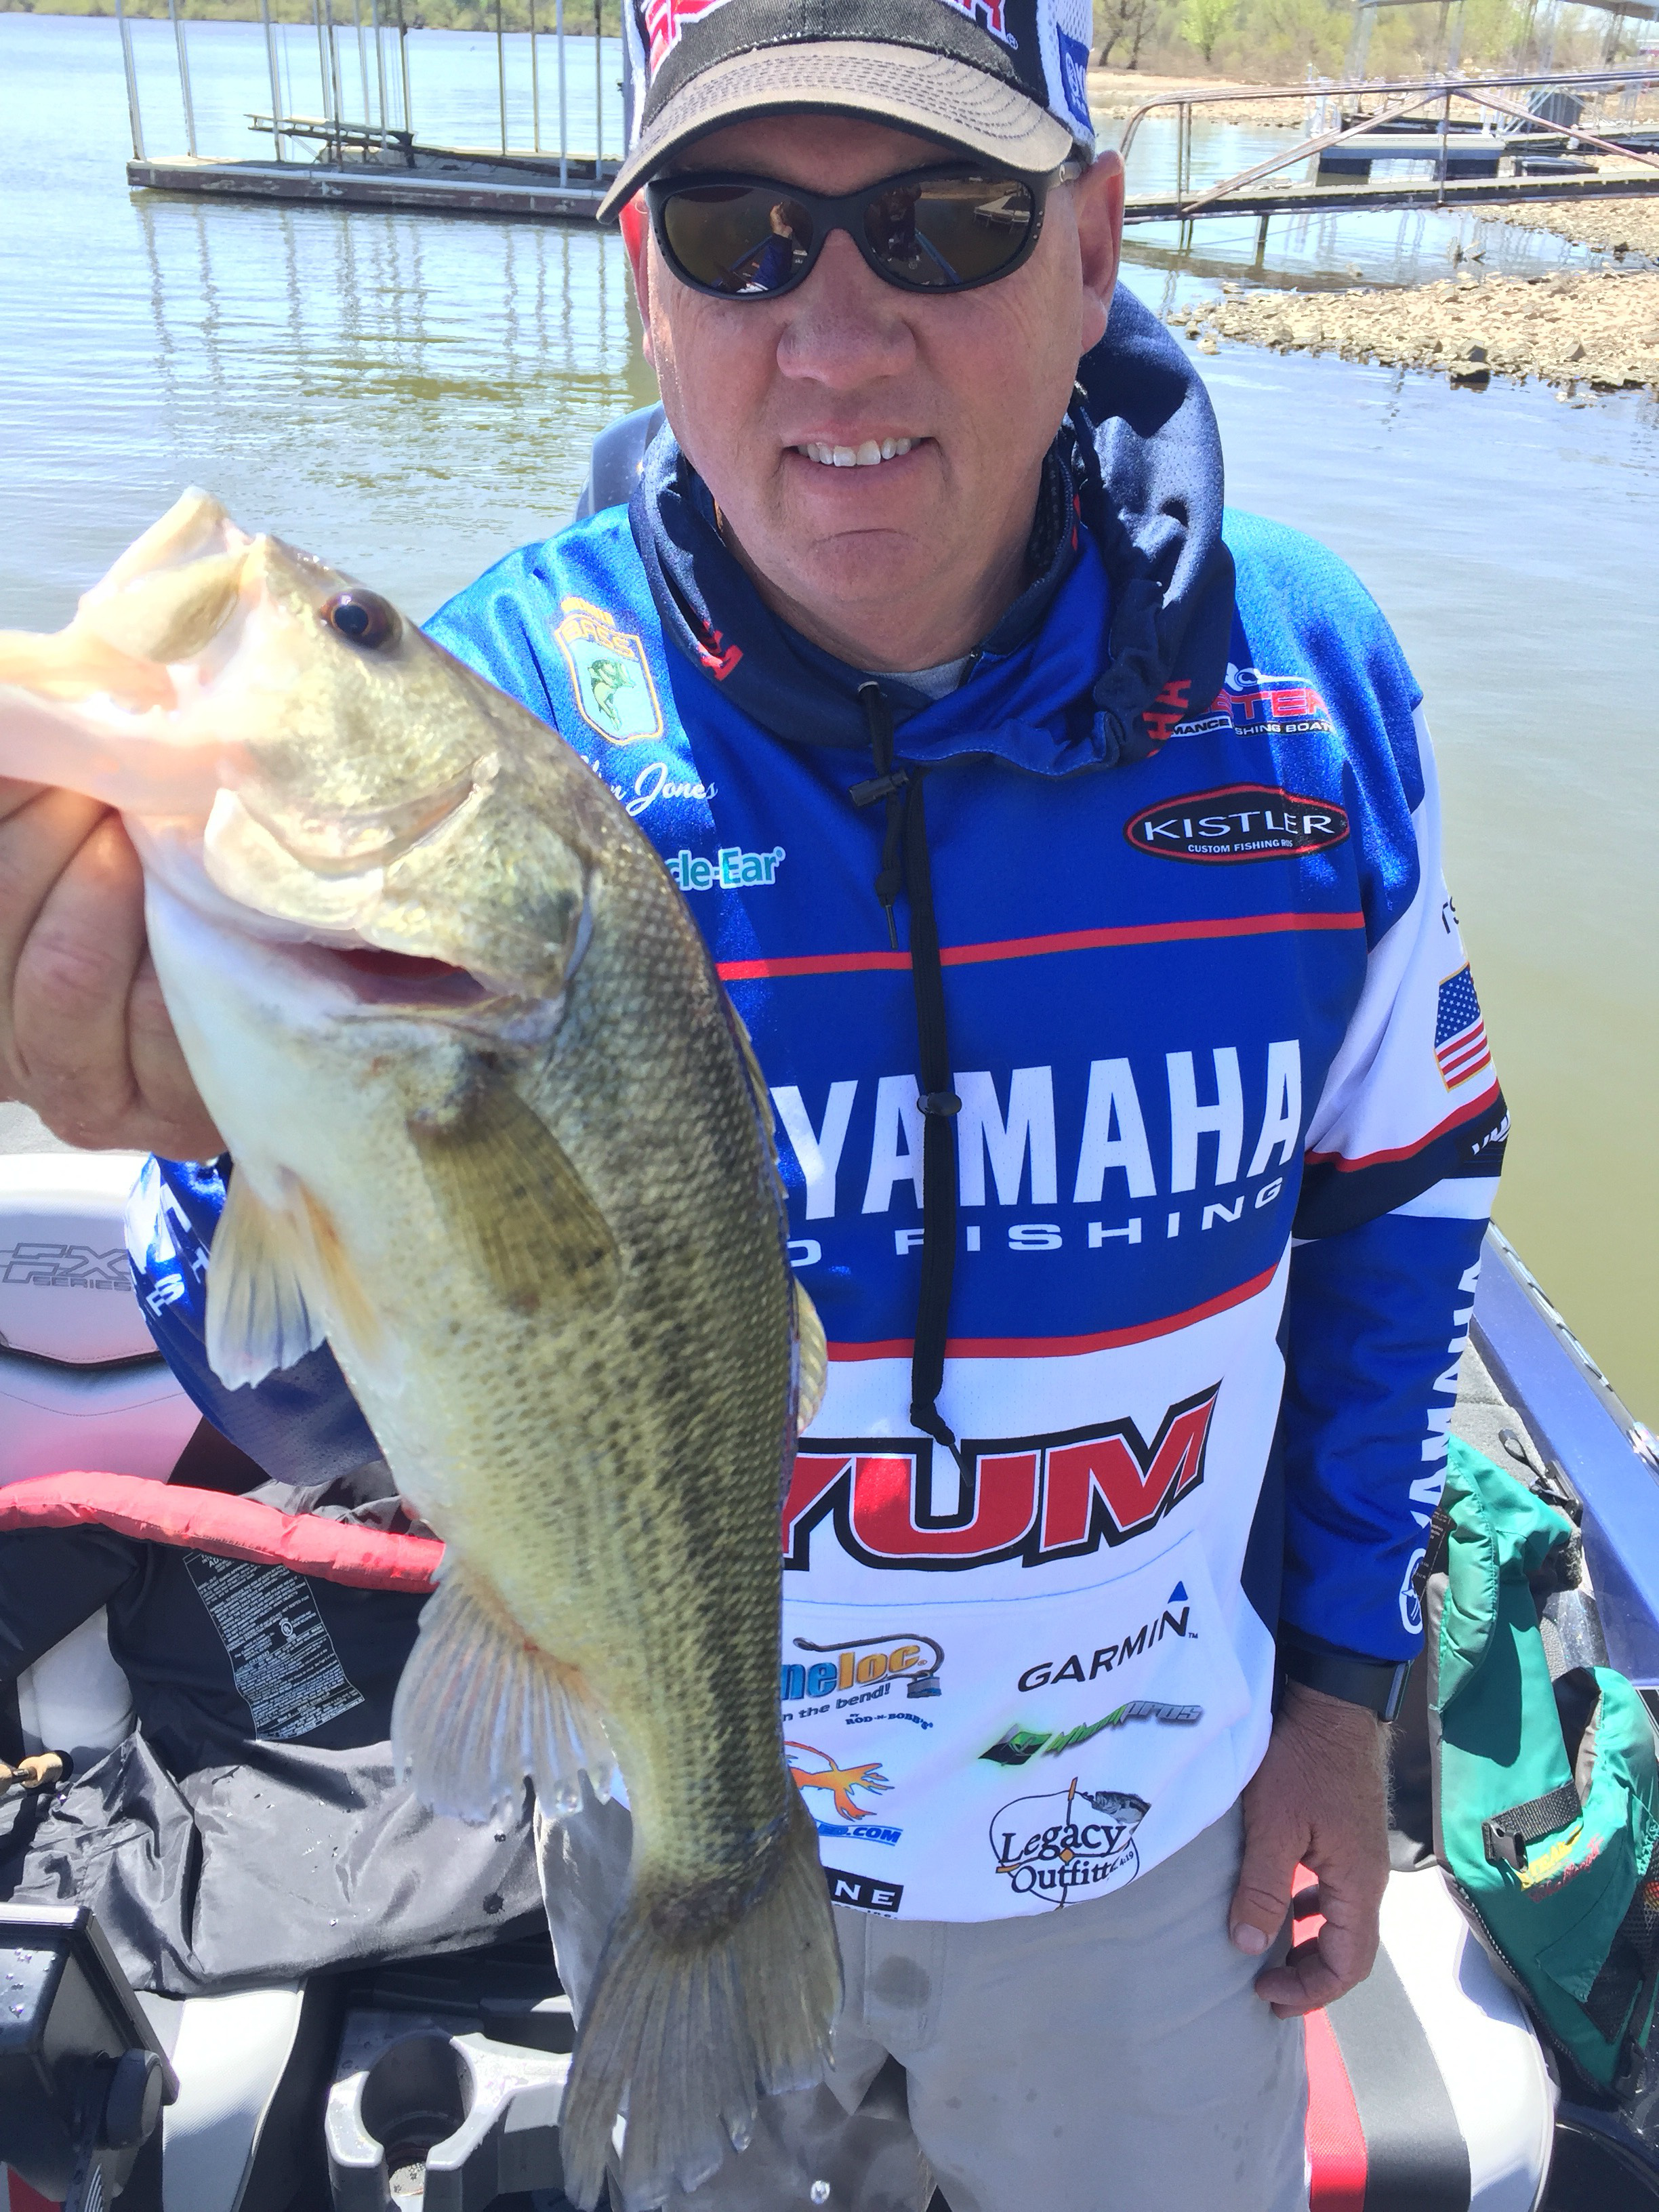 Having a fun and great Day 2 on the water with Alton Jones.  Just up graded to a 3-pounds. 